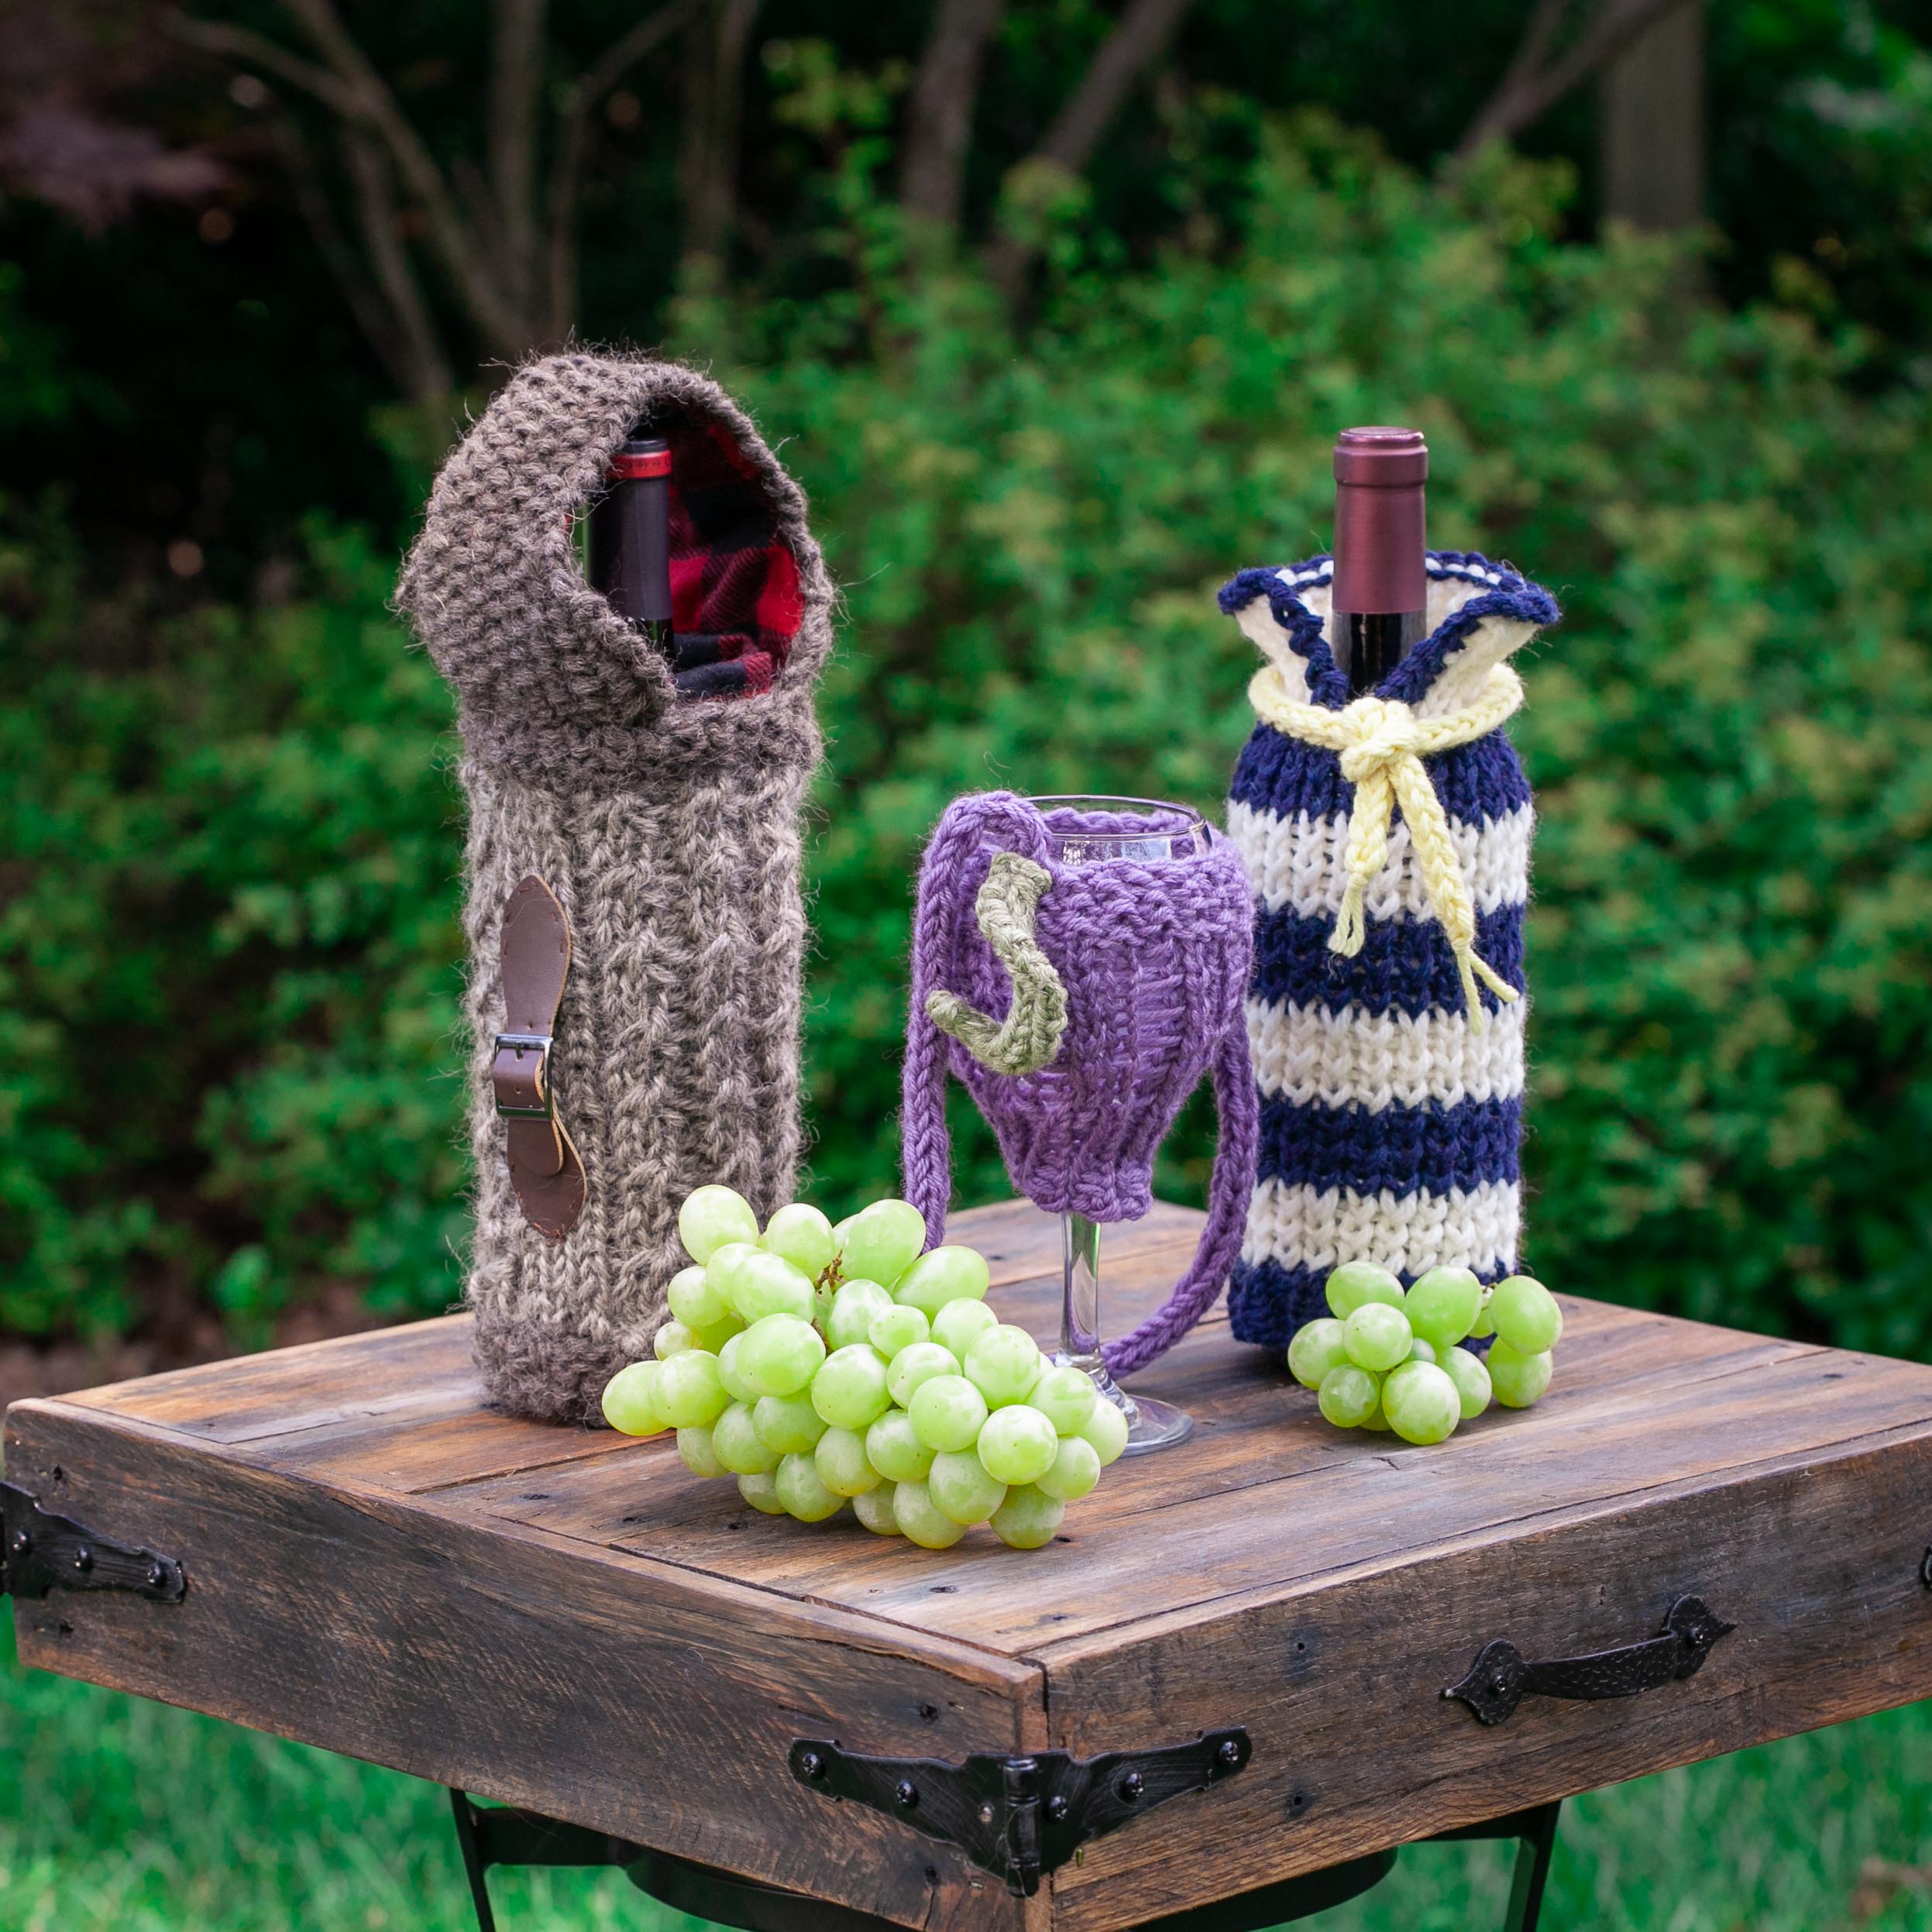 How to Knit a Drink Cozy, Quick Knit Loom